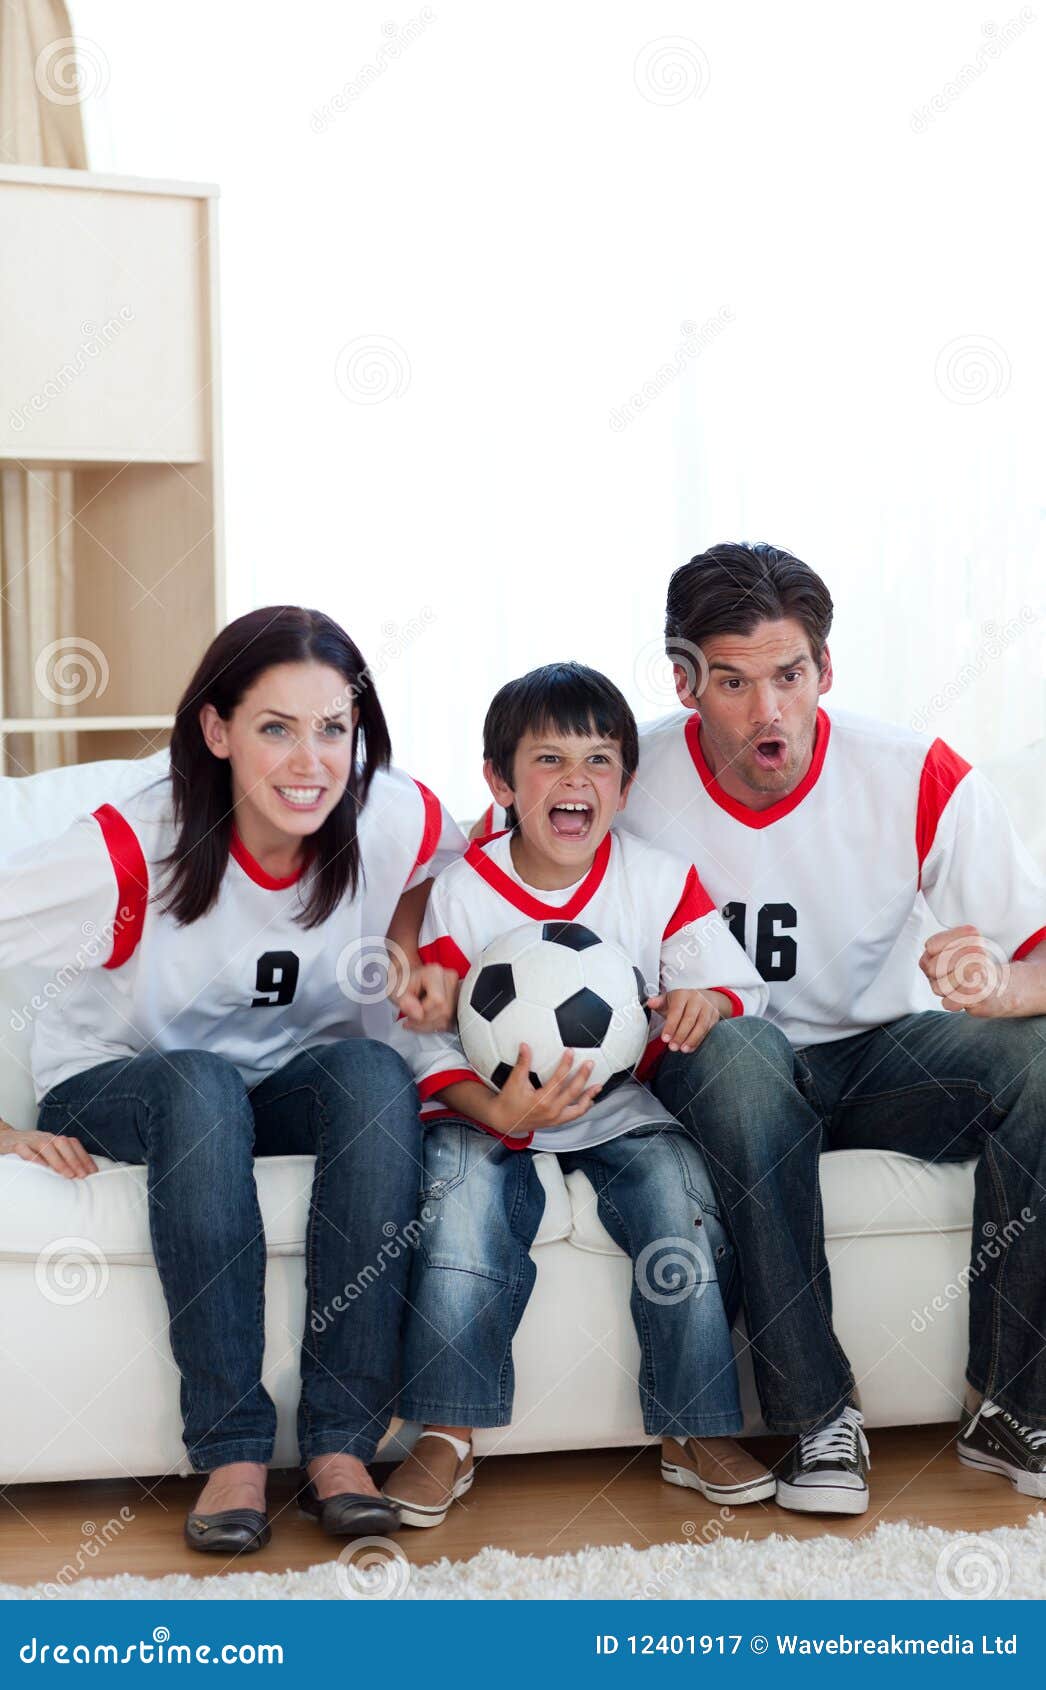 Concentrated Family Watching Football Match on Tv Stock Image